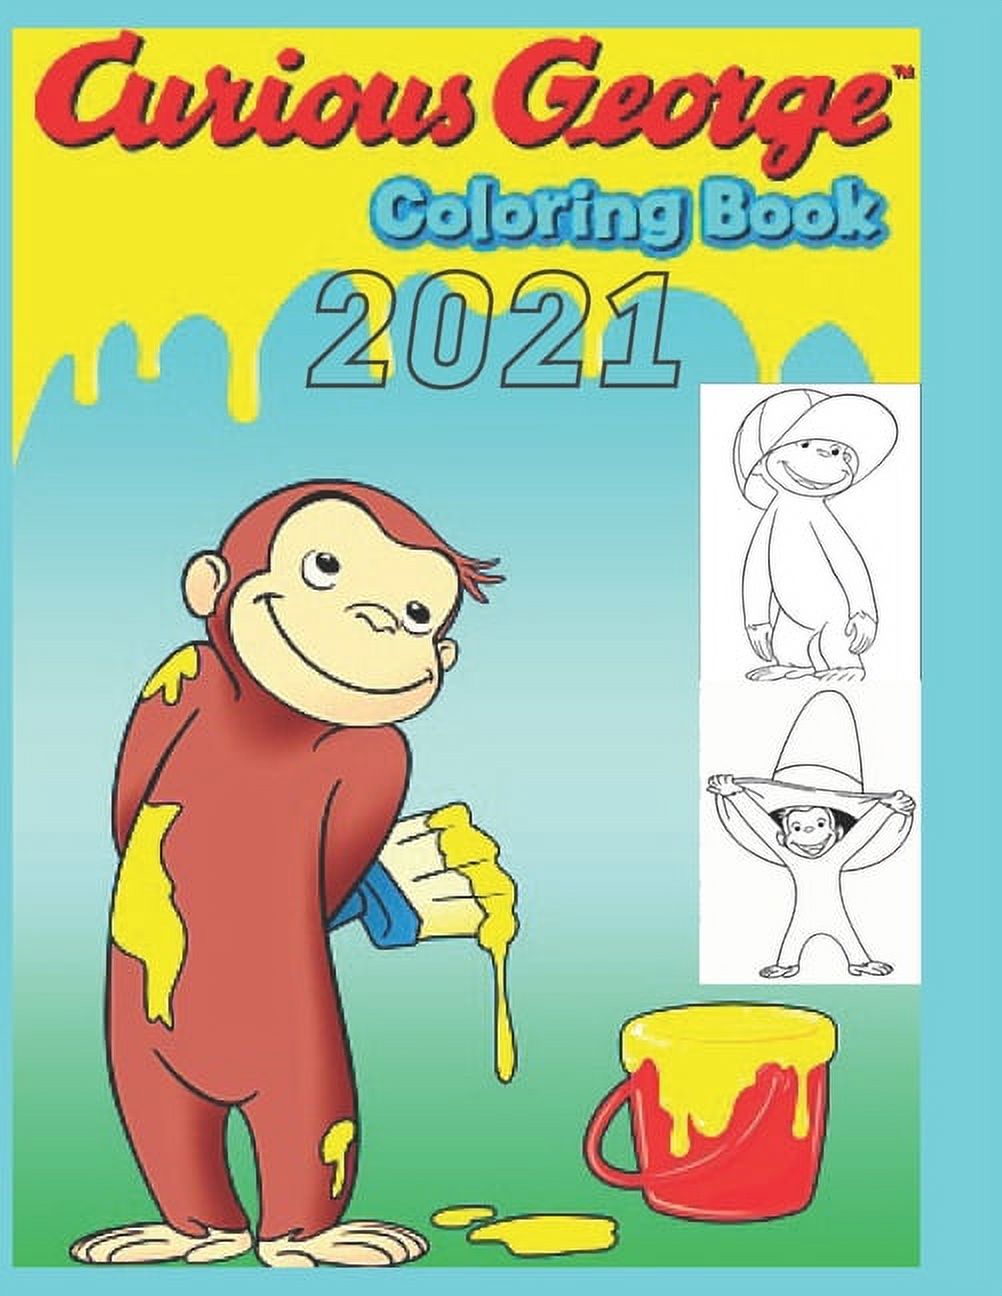 Curious George Coloring Book : Great Gifts For Curious George Fans To Relax And Cultivate Creativity Through Coloring Plenty Of Images Of Curious George (Paperback) - image 1 of 1